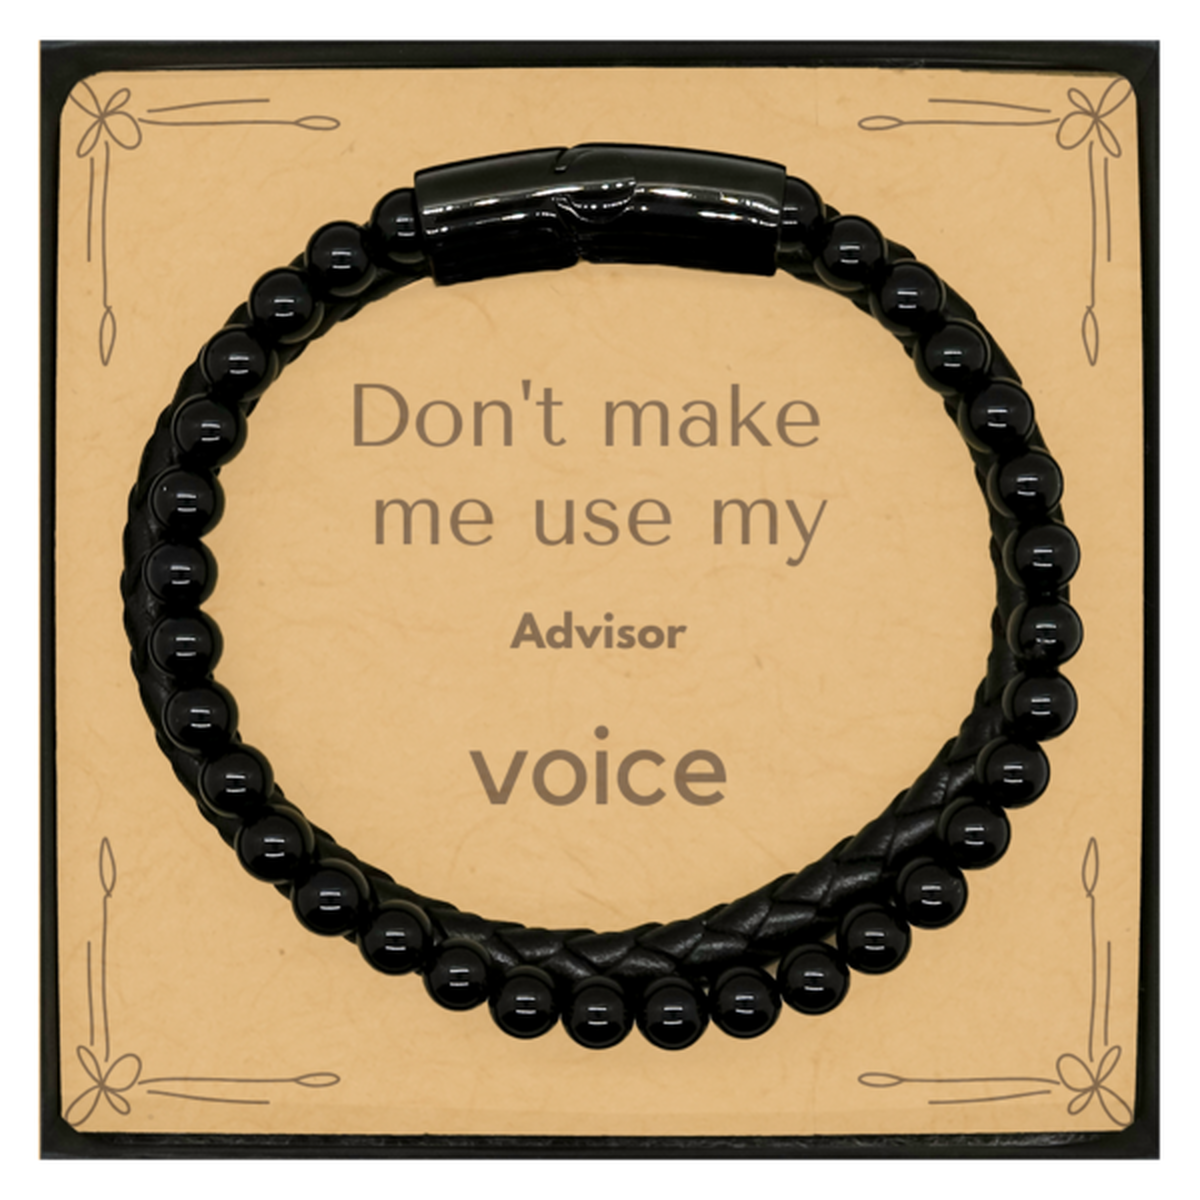 Don't make me use my Advisor voice, Sarcasm Advisor Card Gifts, Christmas Advisor Stone Leather Bracelets Birthday Unique Gifts For Advisor Coworkers, Men, Women, Colleague, Friends